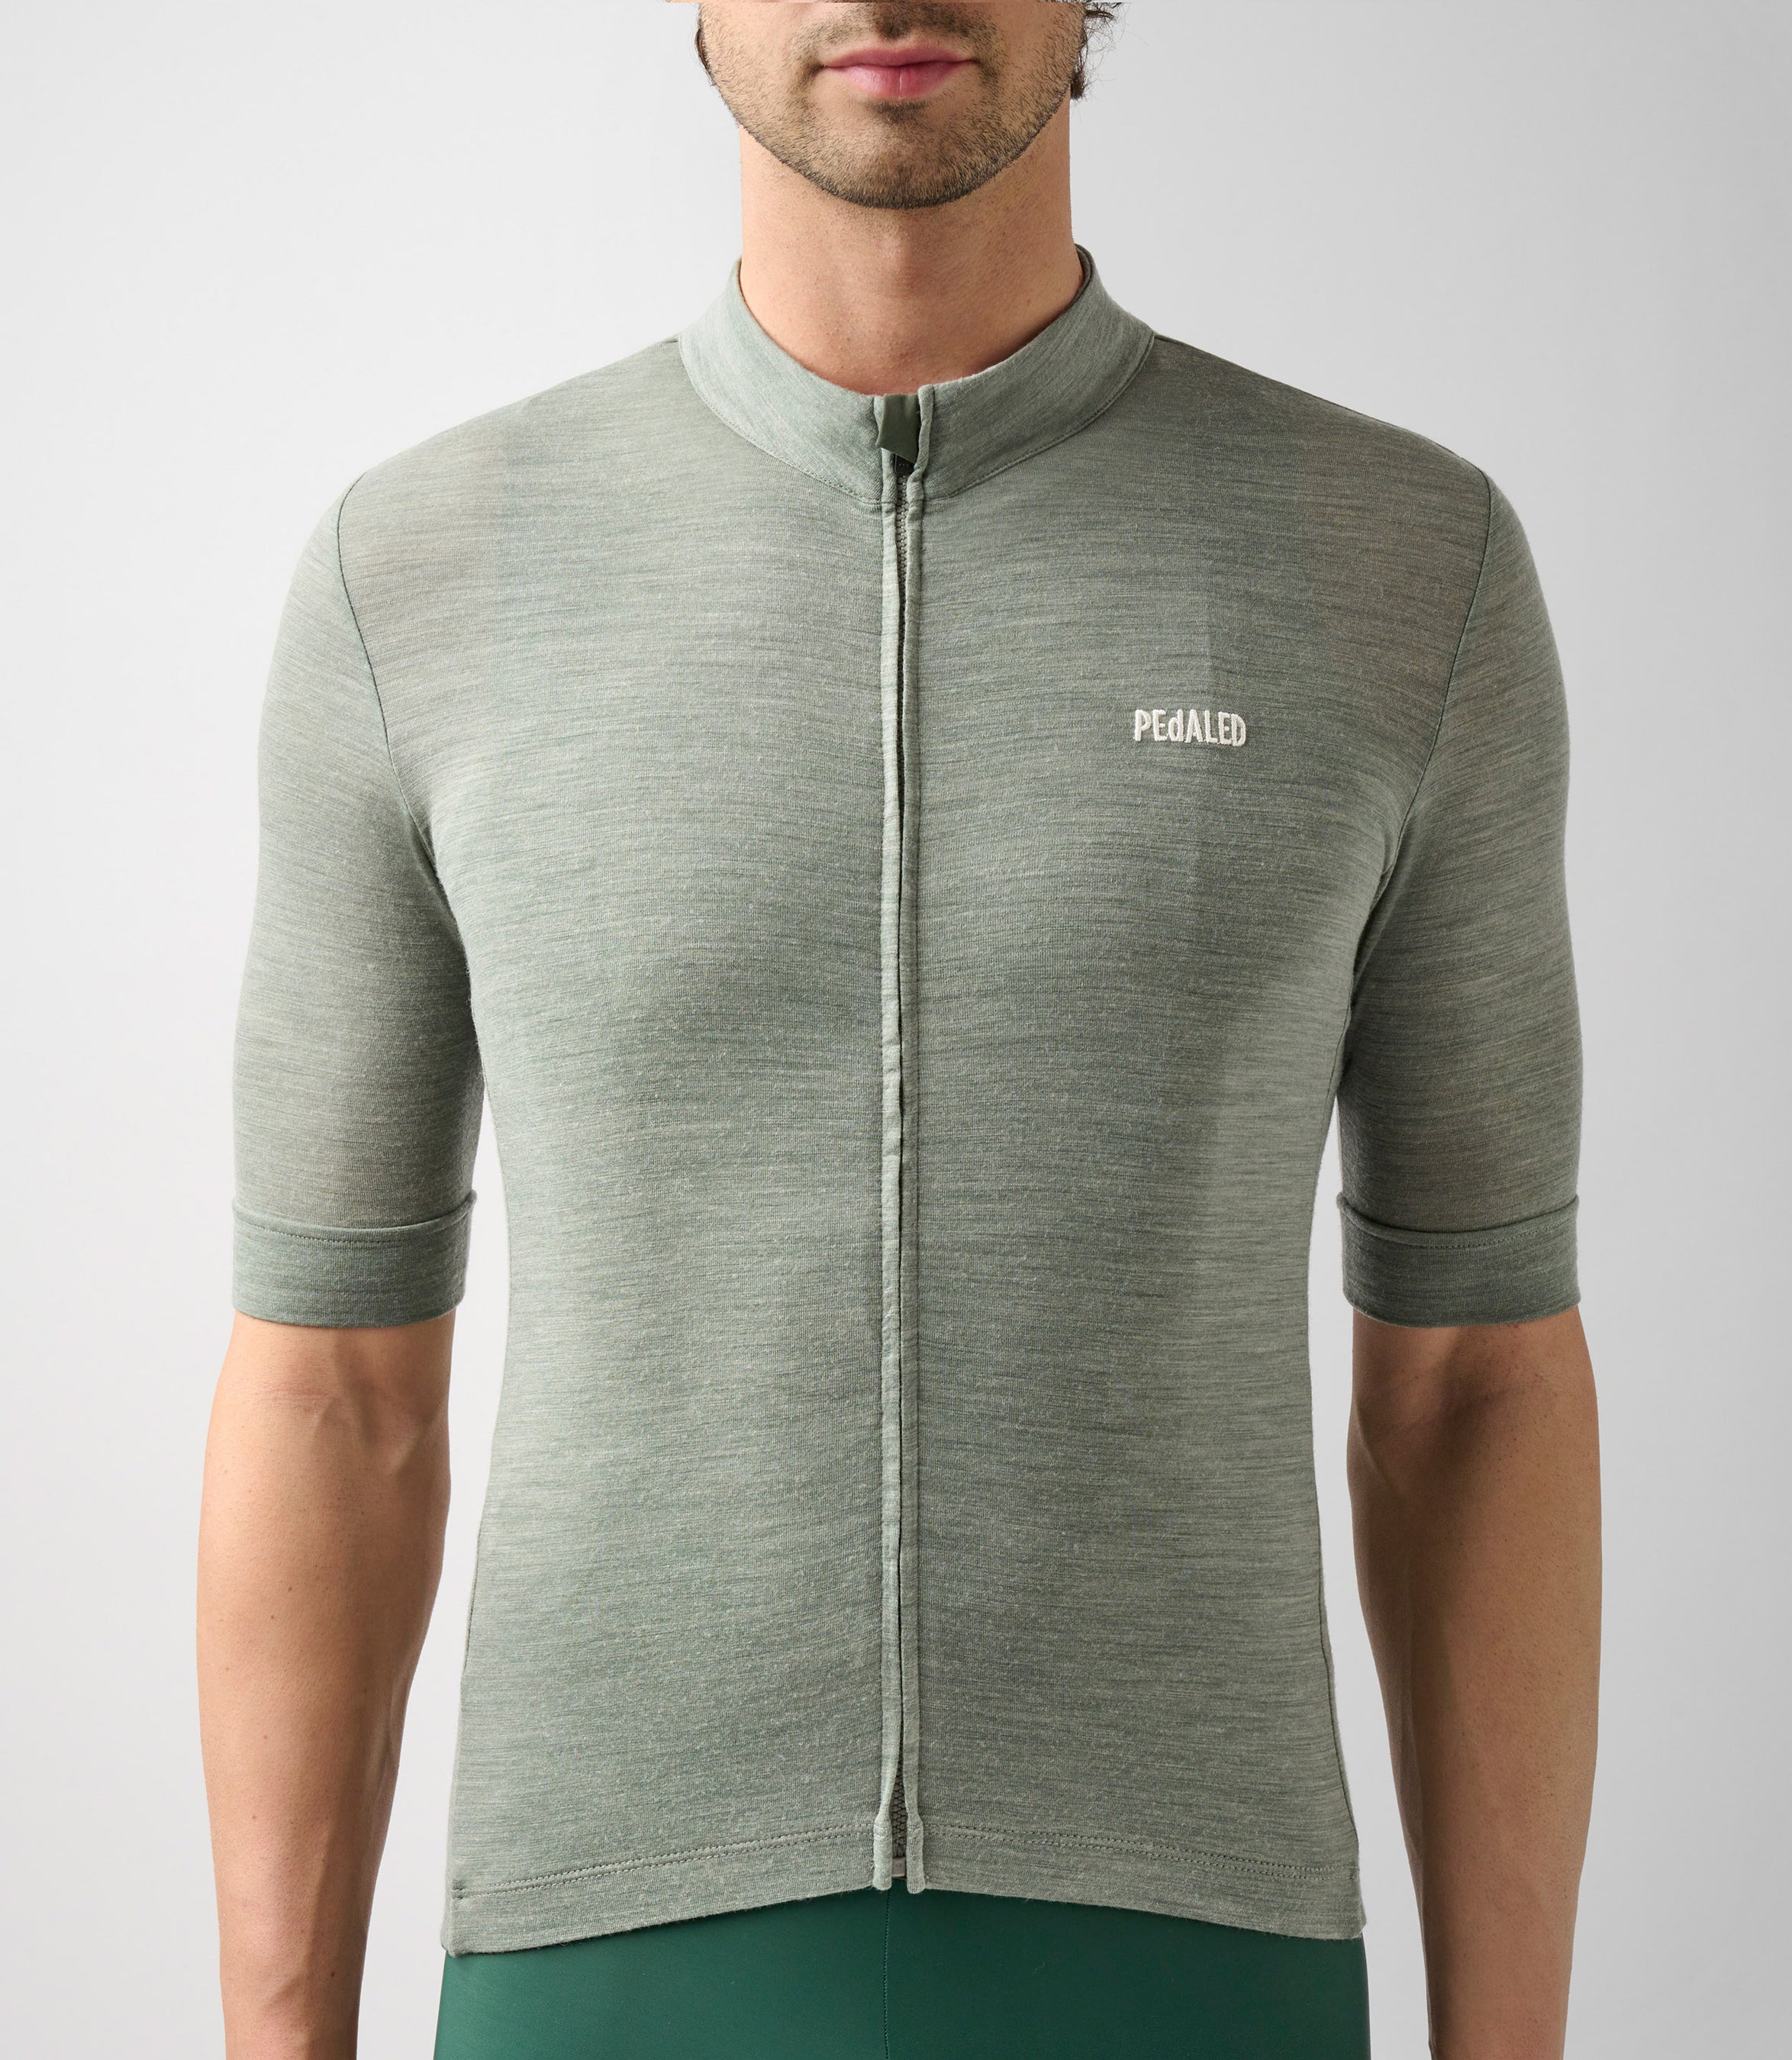 23SJSEM03PE_5_cycling merino jersey men green essential front pedaled